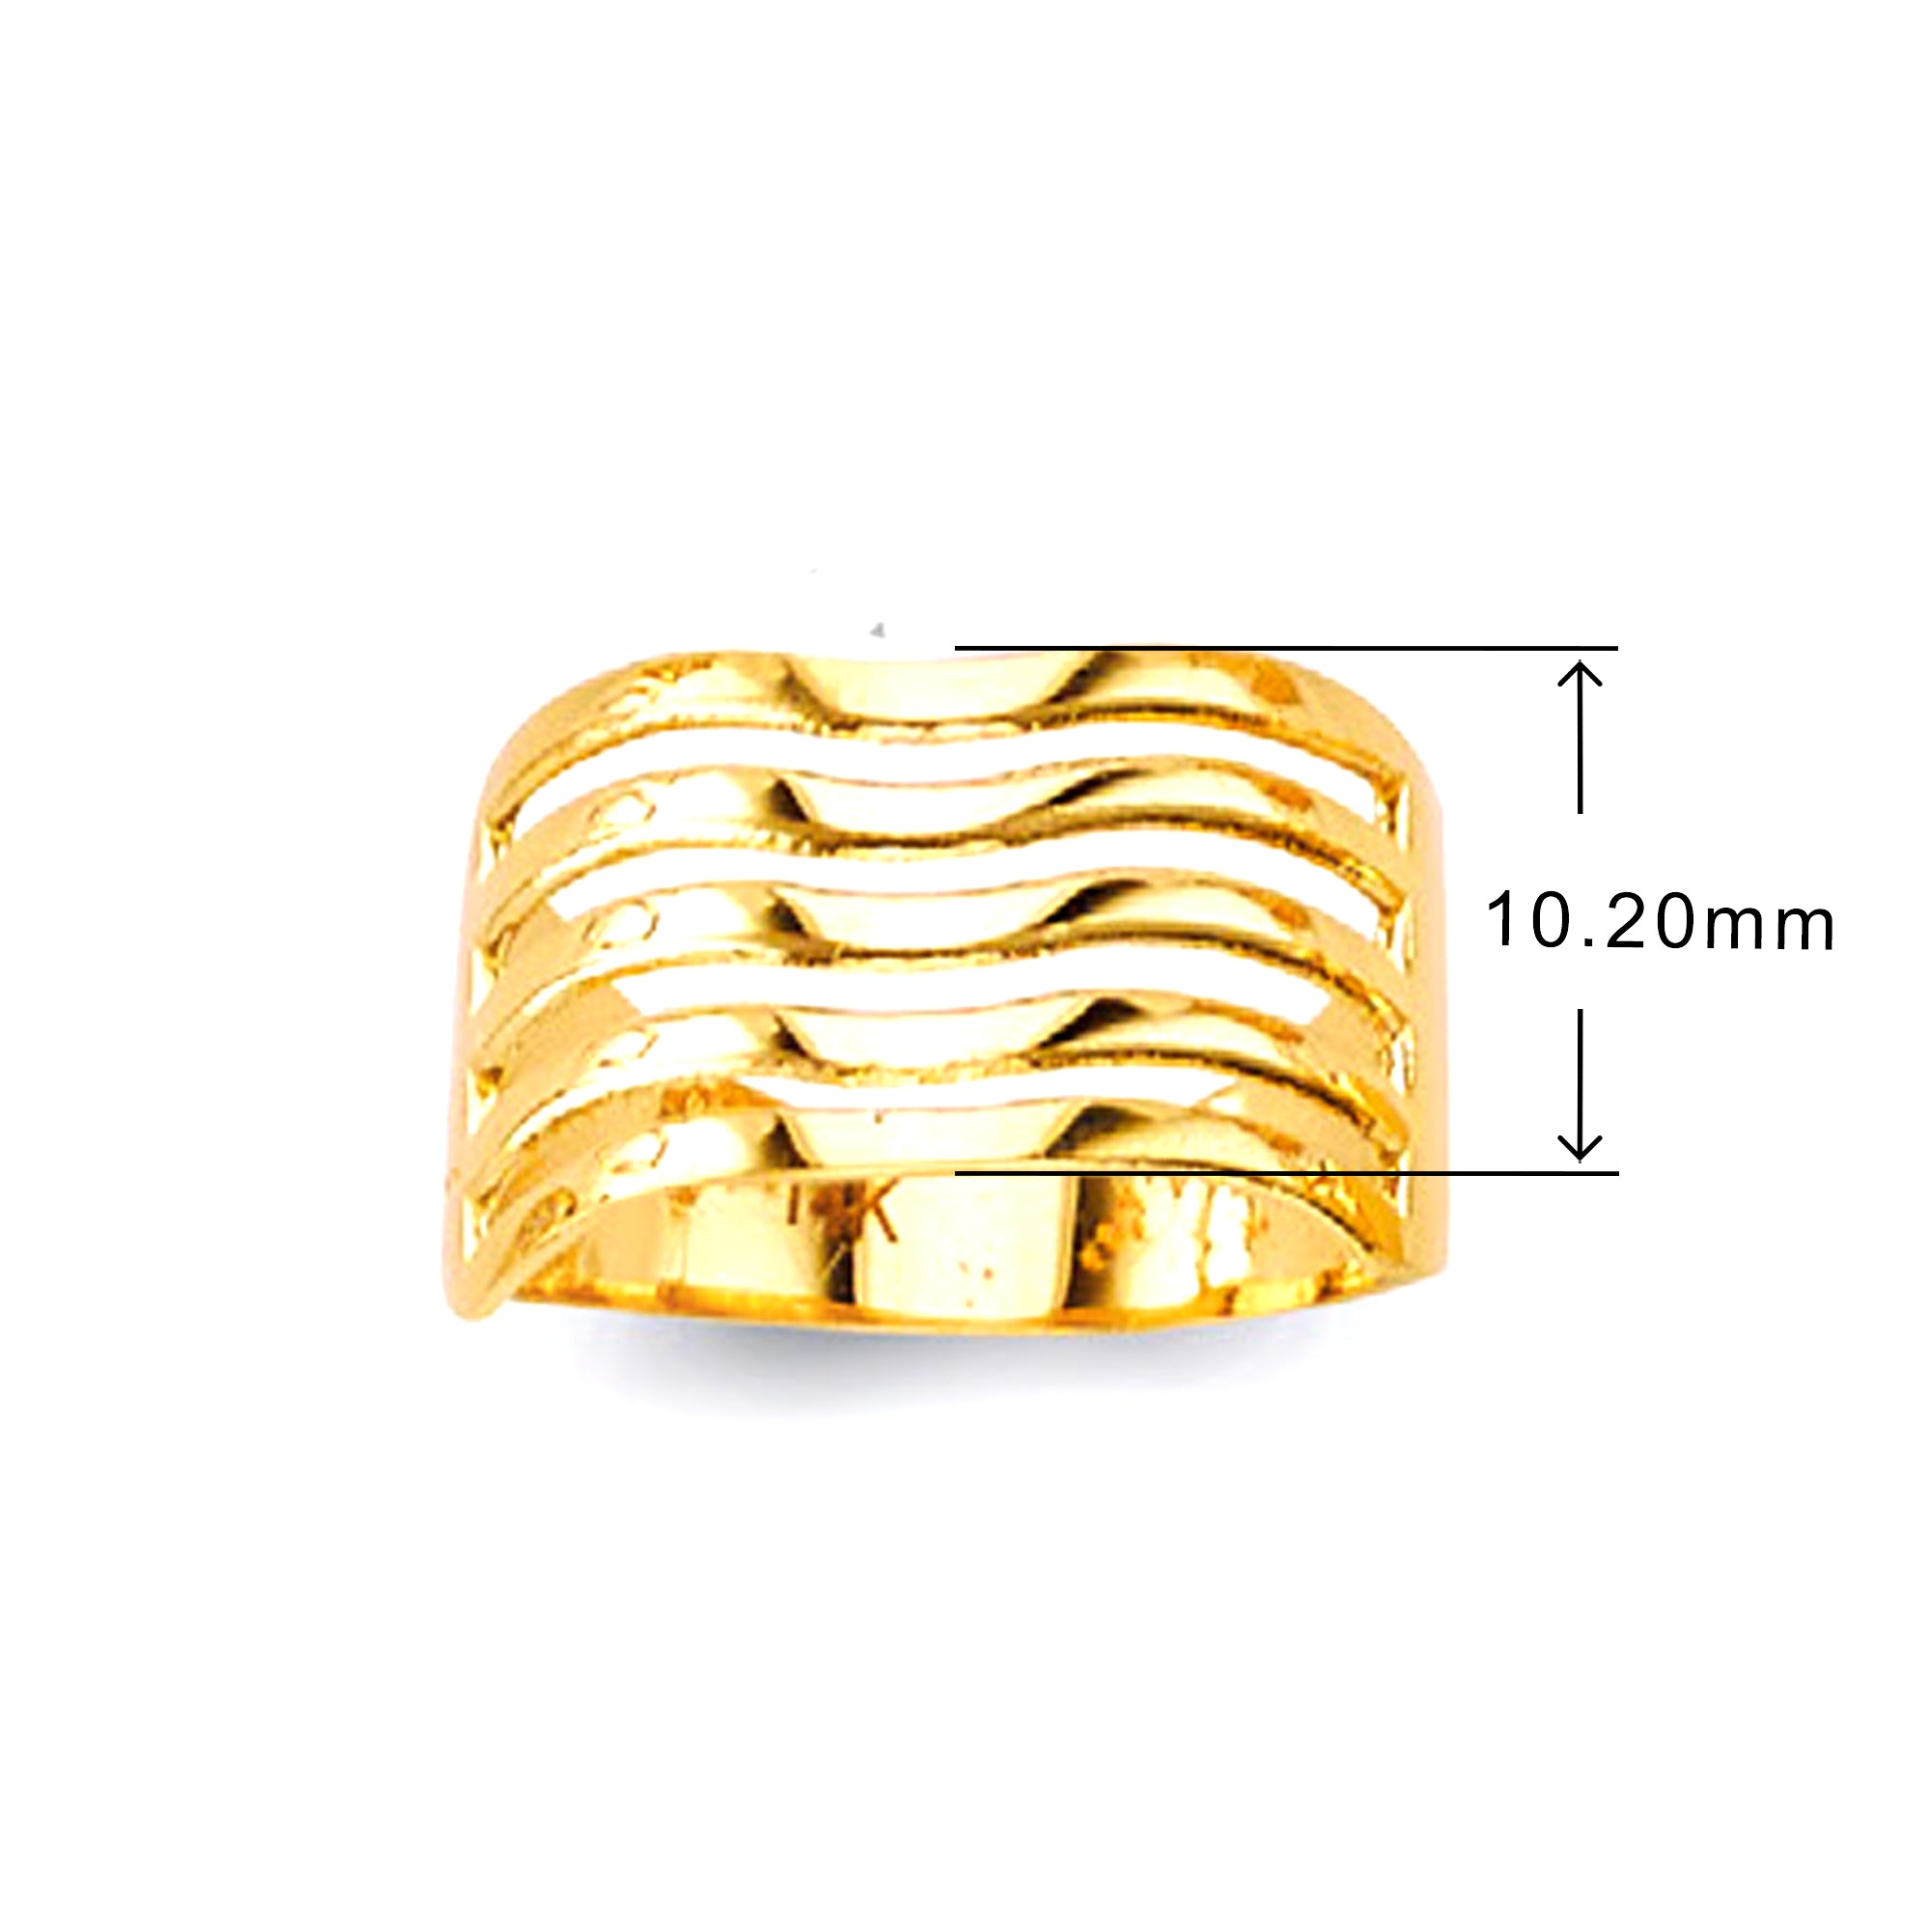 Hollow Stackable Ring in Solid Gold with Measurement